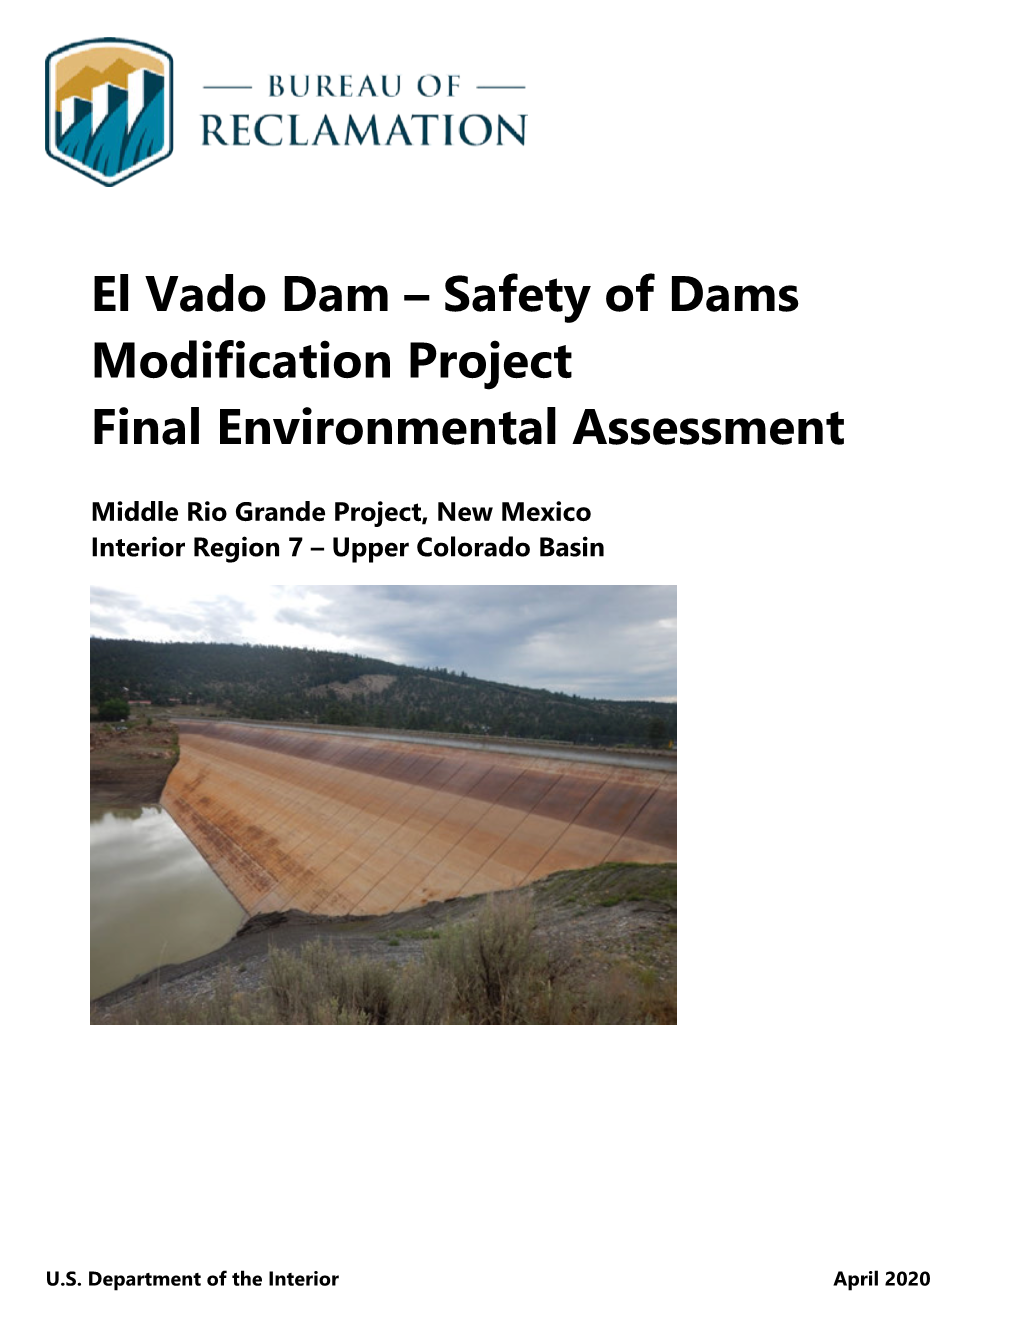 El Vado Dam – Safety of Dams Modification Project Final Environmental Assessment